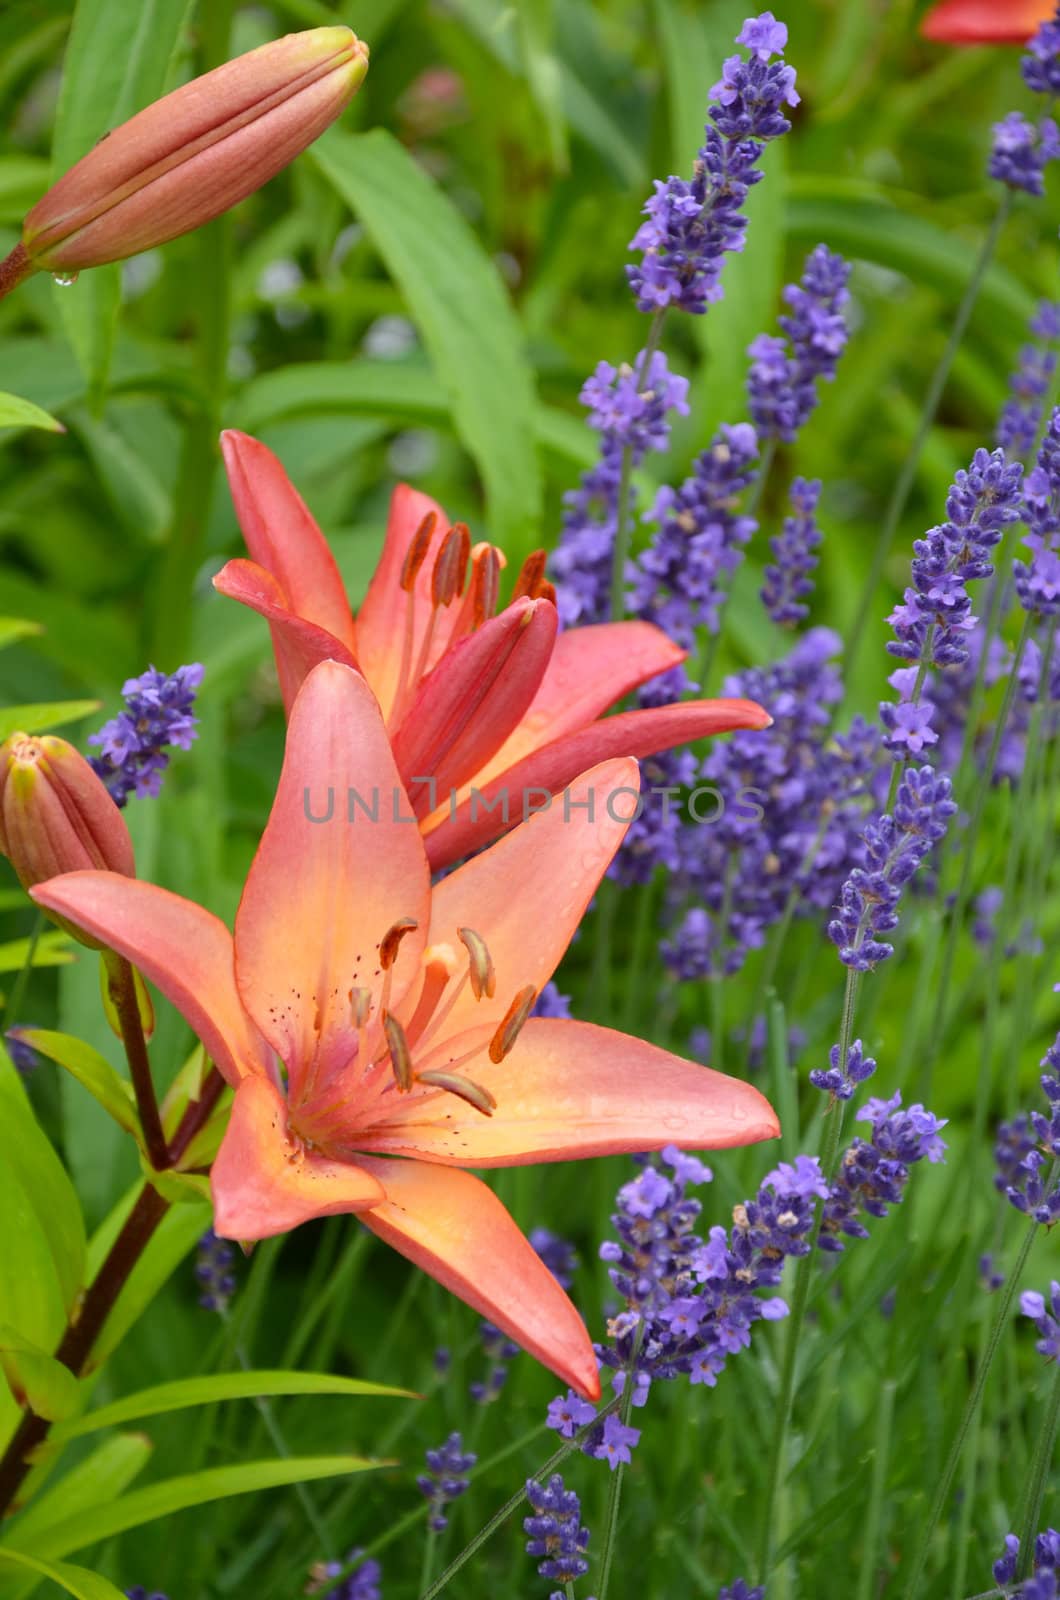 Orange lily and blue salvia flowers in full bloom